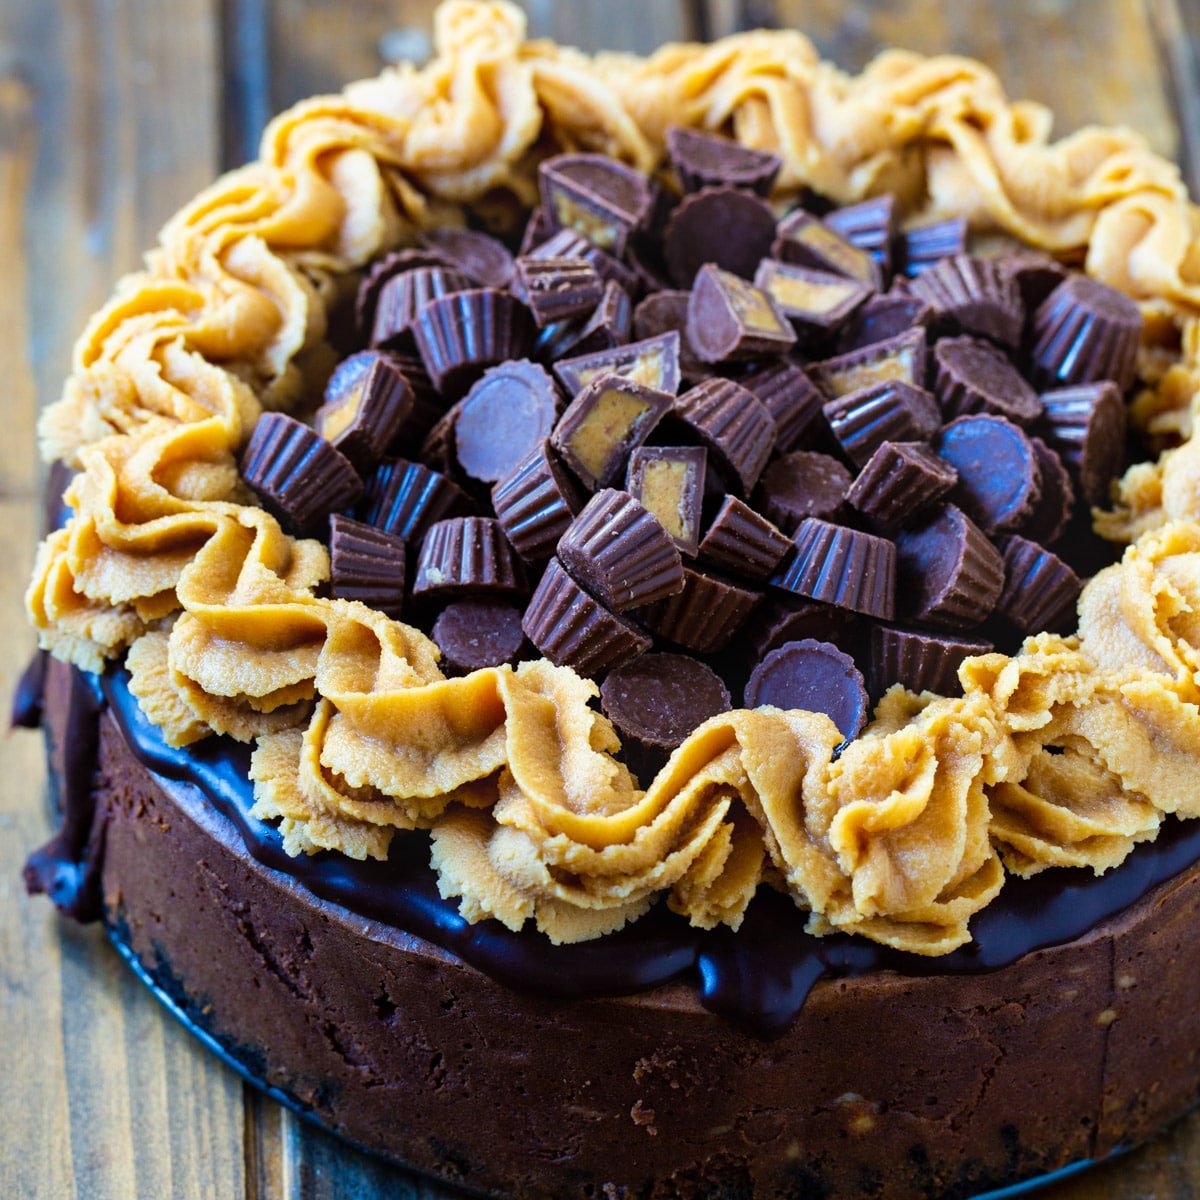 Whole Chocolate Peanut Butter Cup Cheesecake covered with mini peanut butter cups.